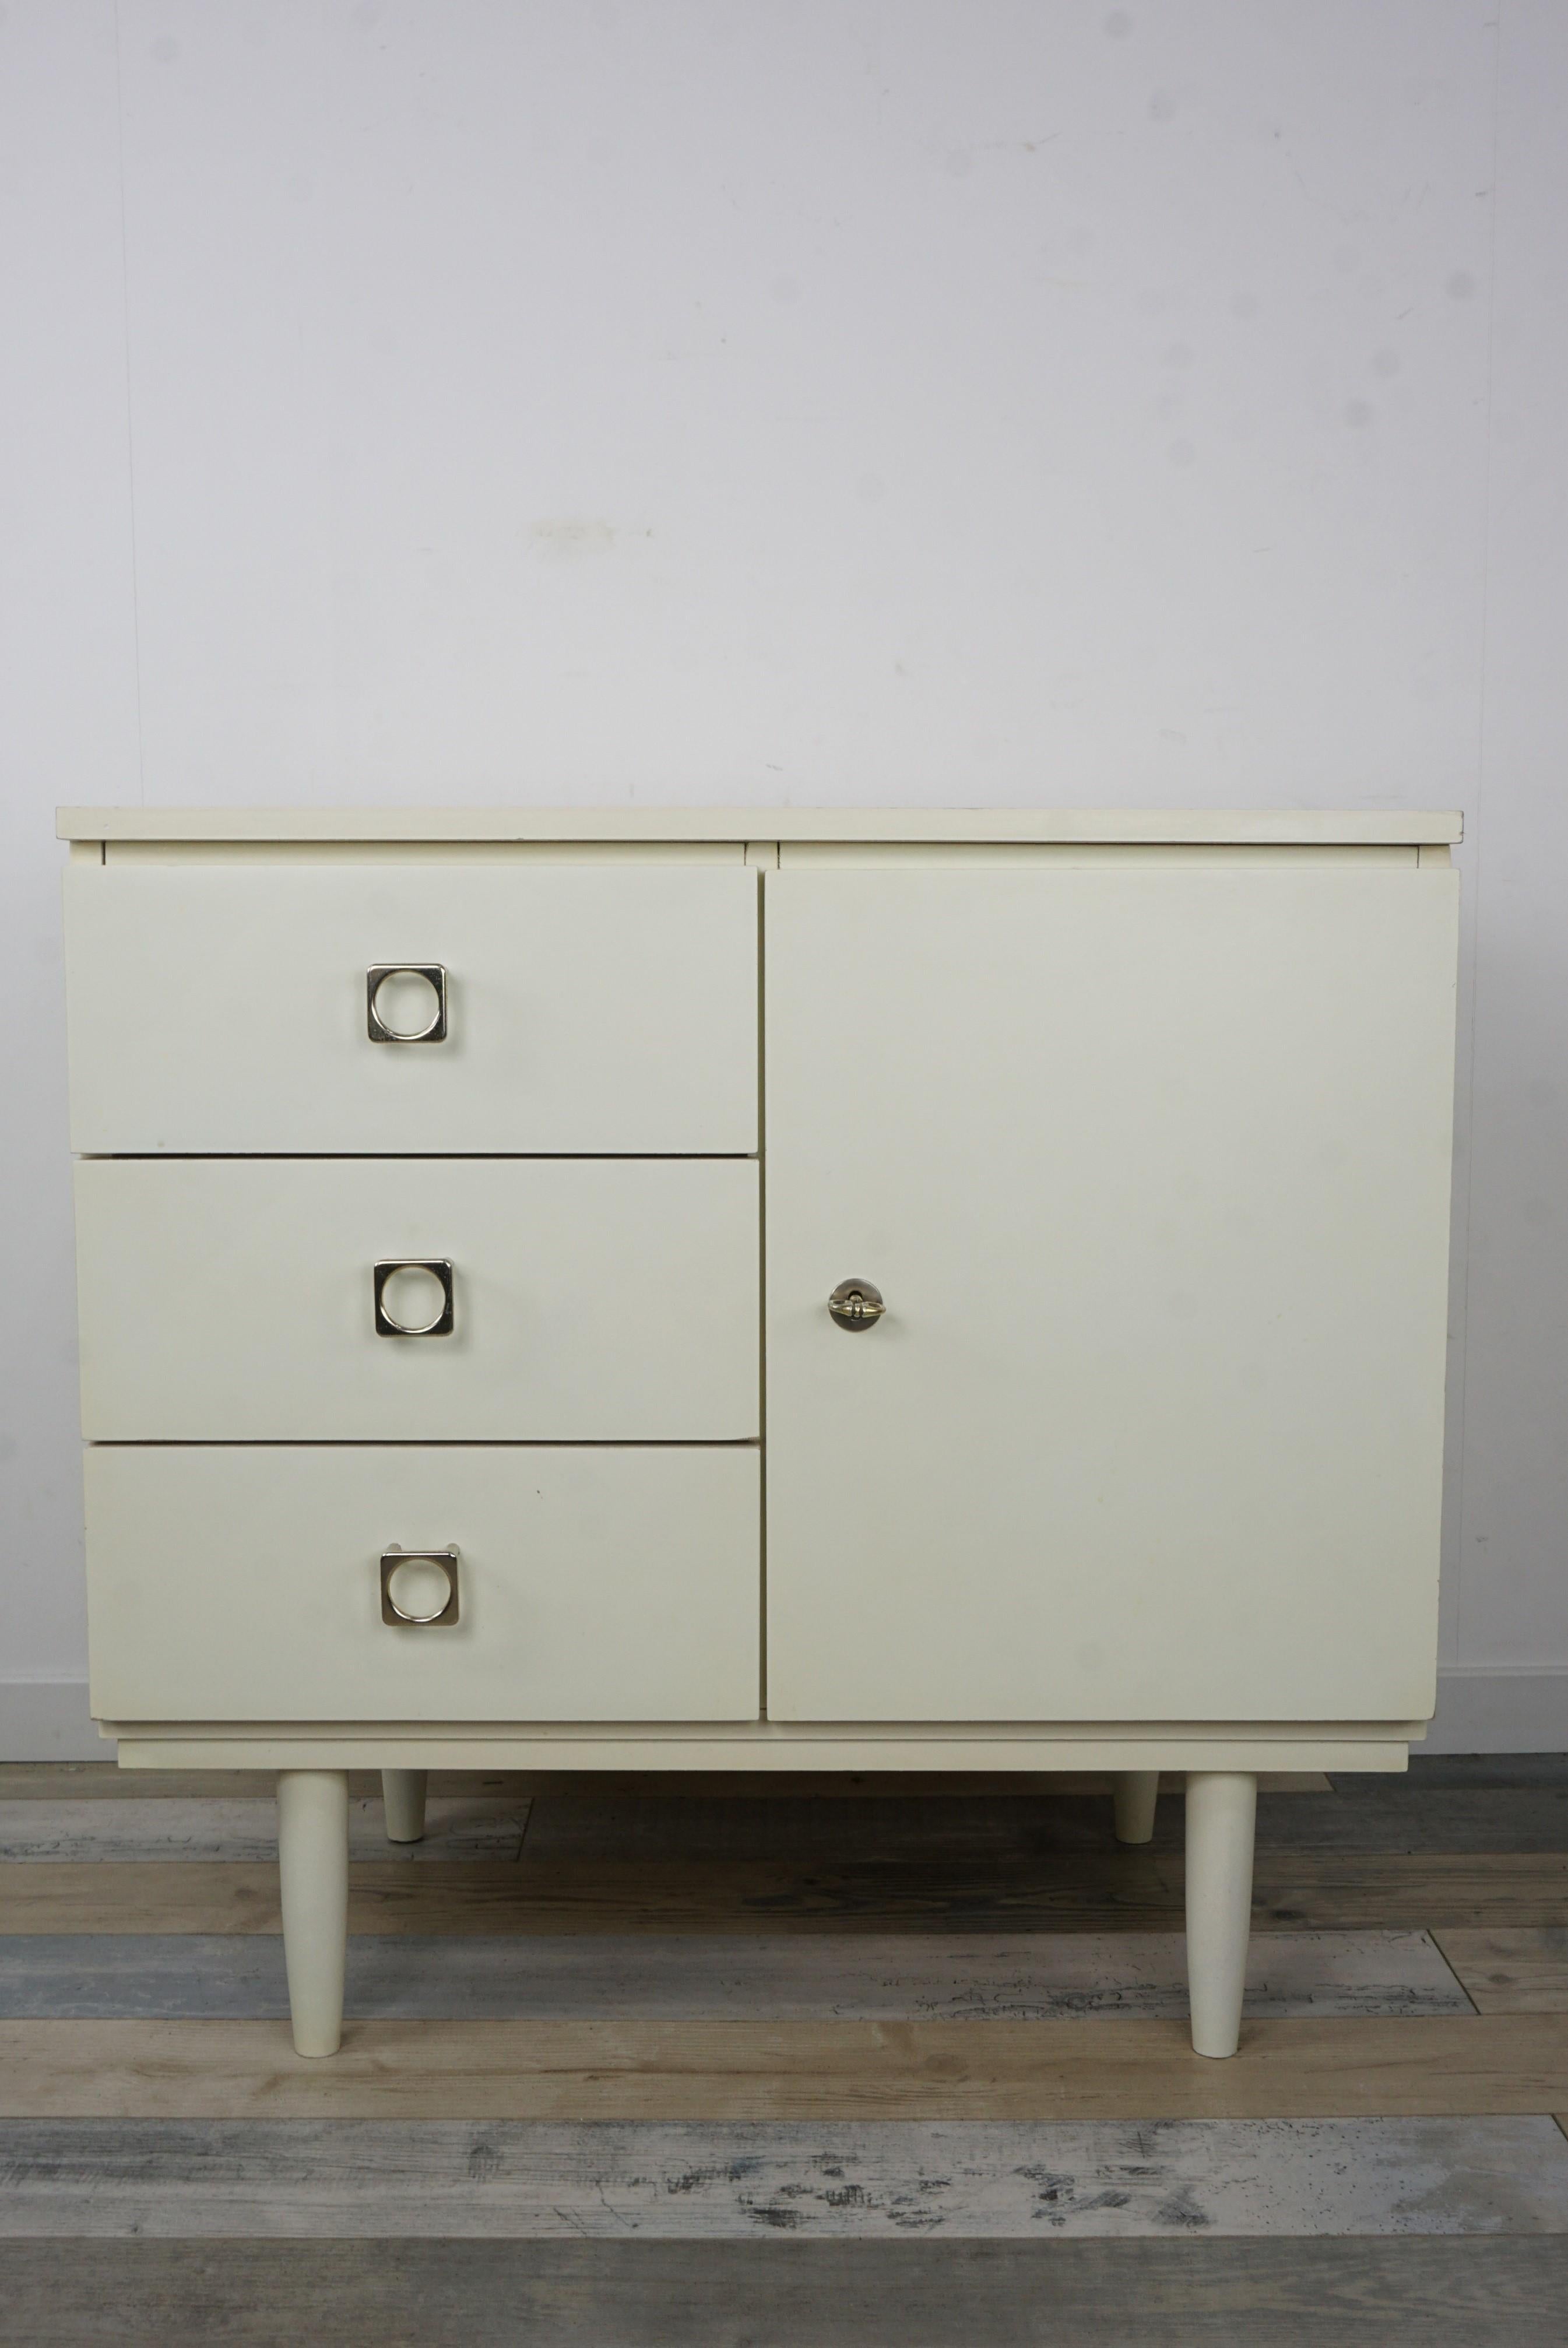 Scandinavian Modern 1950s-1960s White Satin Lacquered Wooden Cabinet